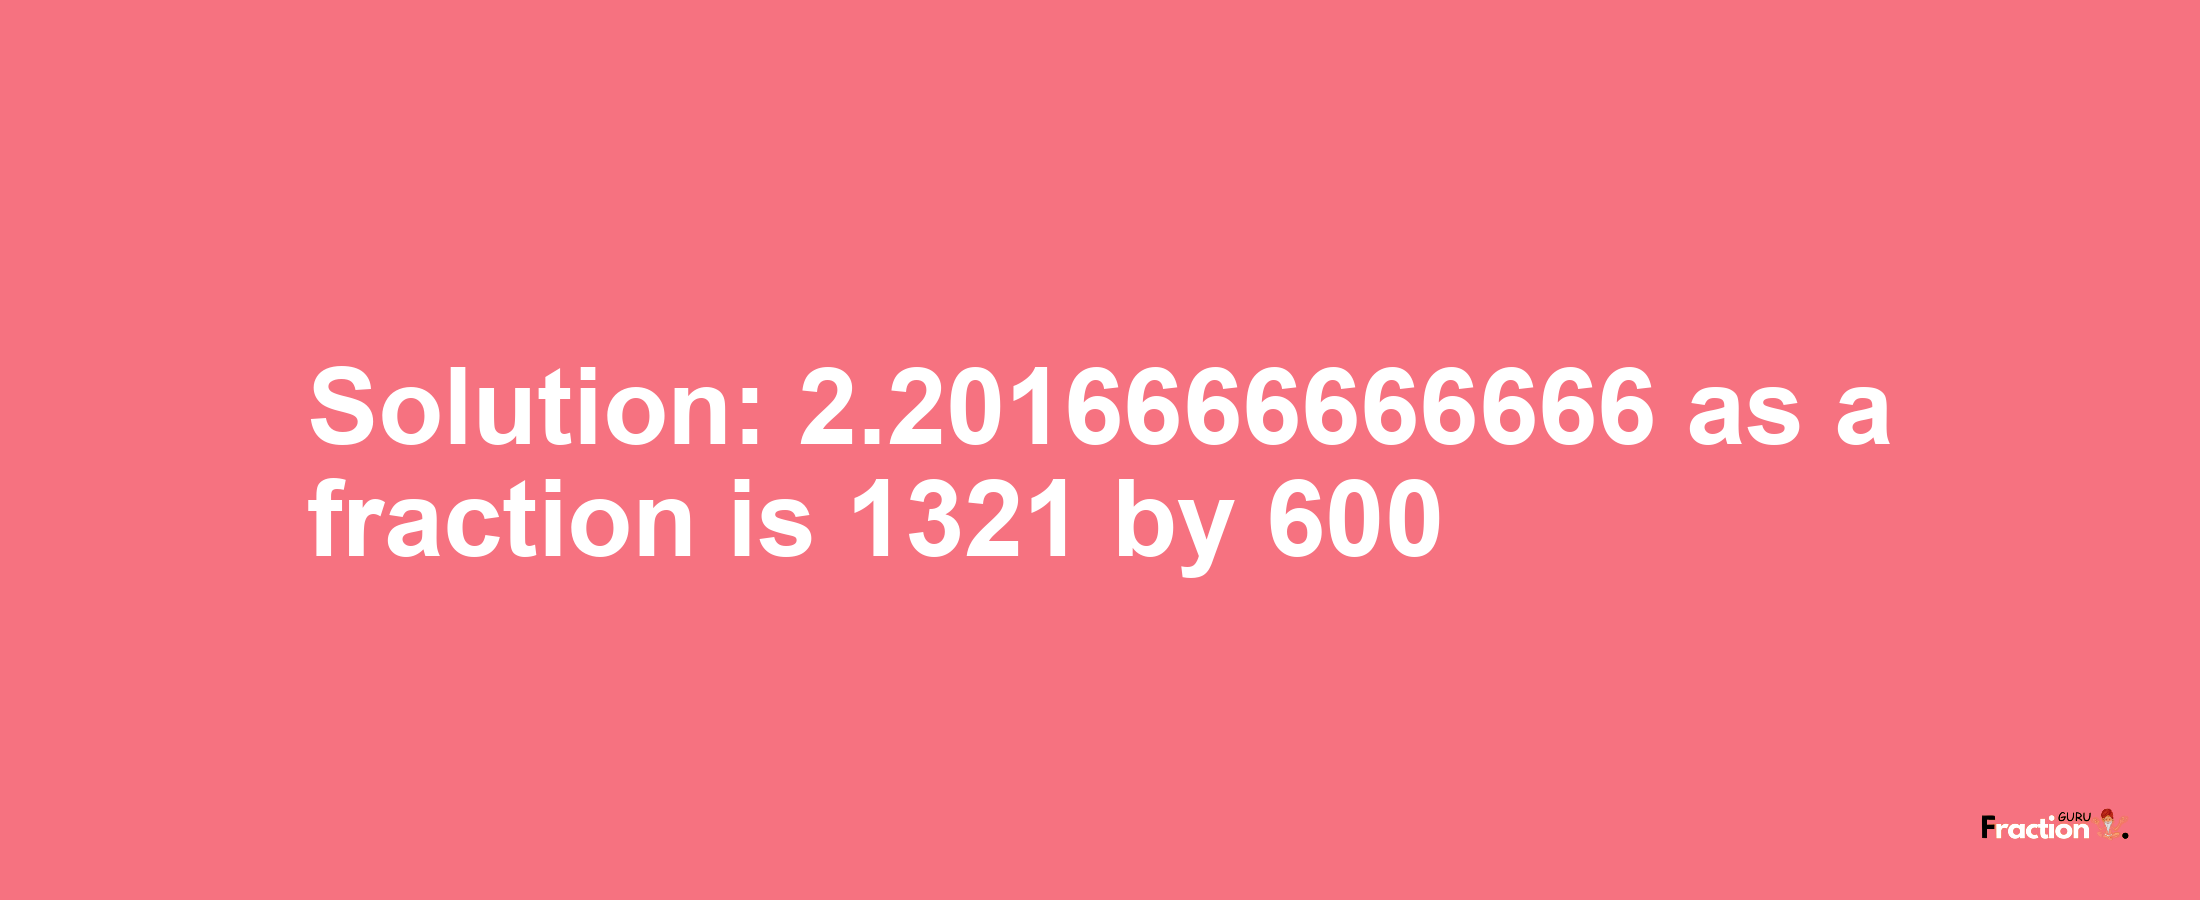 Solution:2.2016666666666 as a fraction is 1321/600